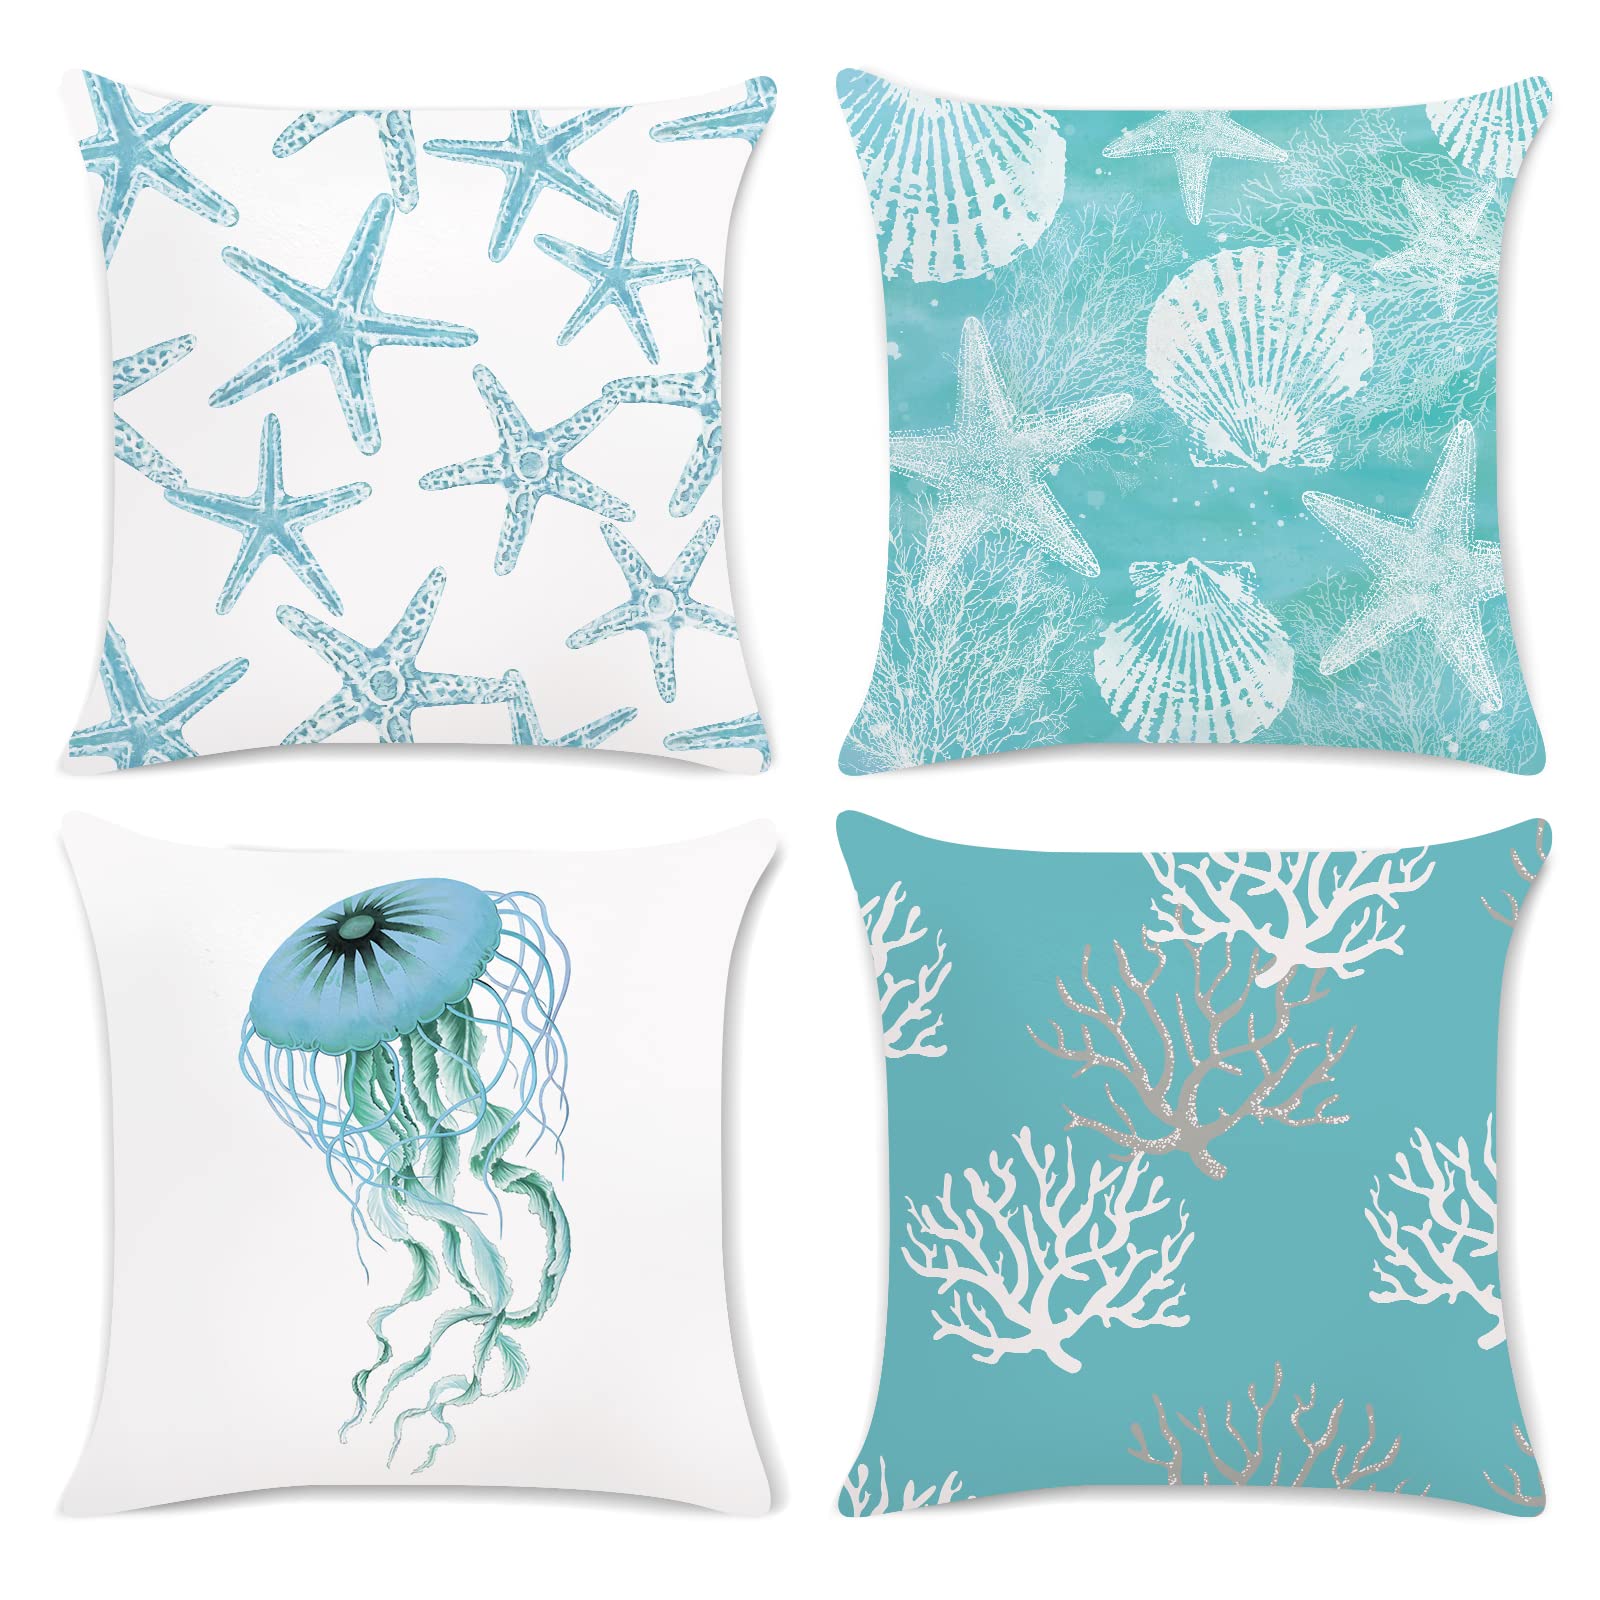 Bonhause Turquoise Coastal Pillow Covers 18x18 Inch Set of 4 Beach Starfish Seashell Ocean Coral Jellyfish Pillow Cases Soft Vel